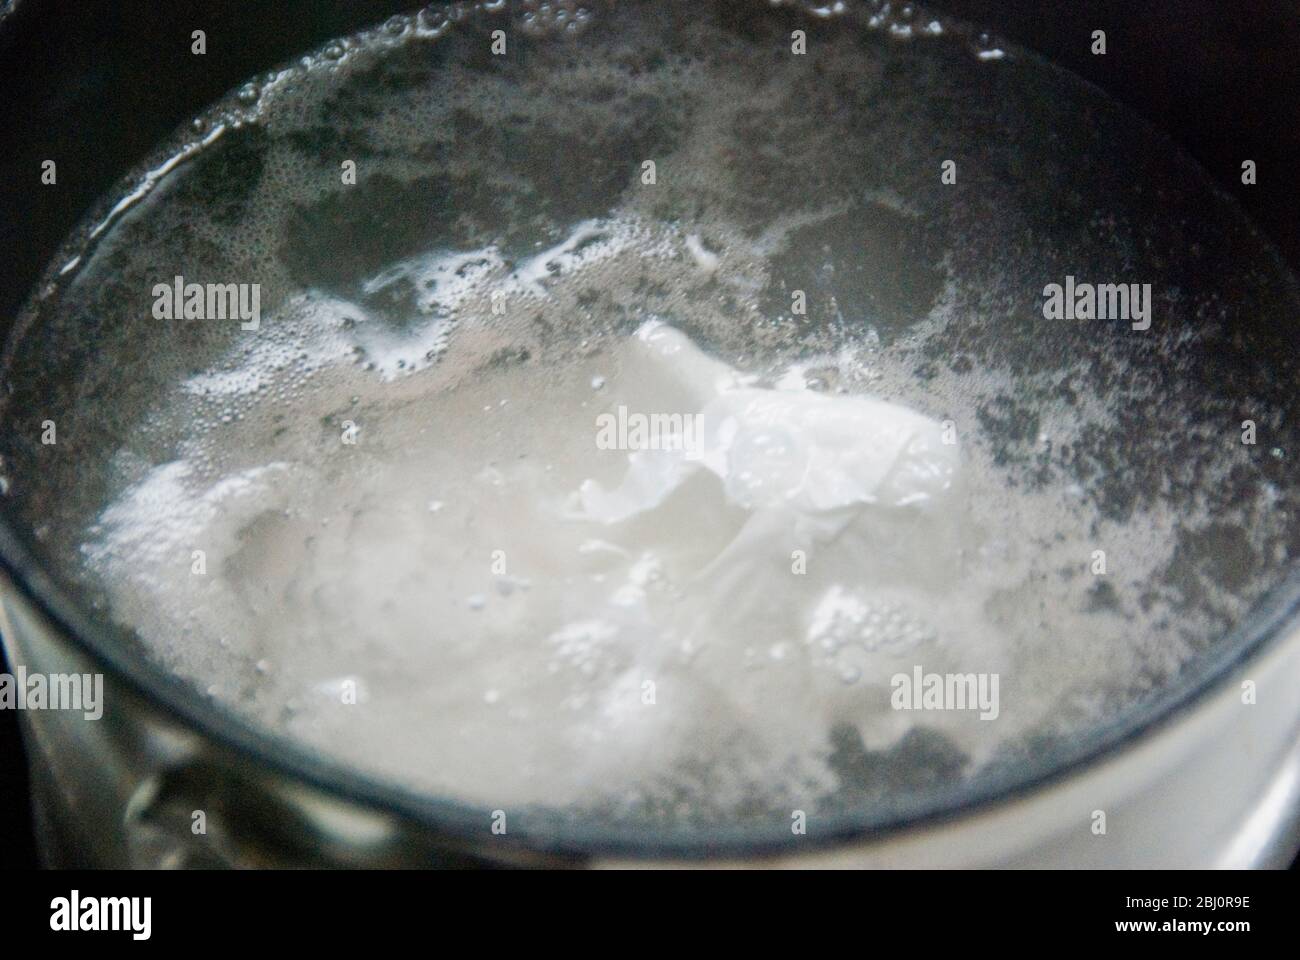 Detail of pan of water simmering with a poached egg - Stock Photo